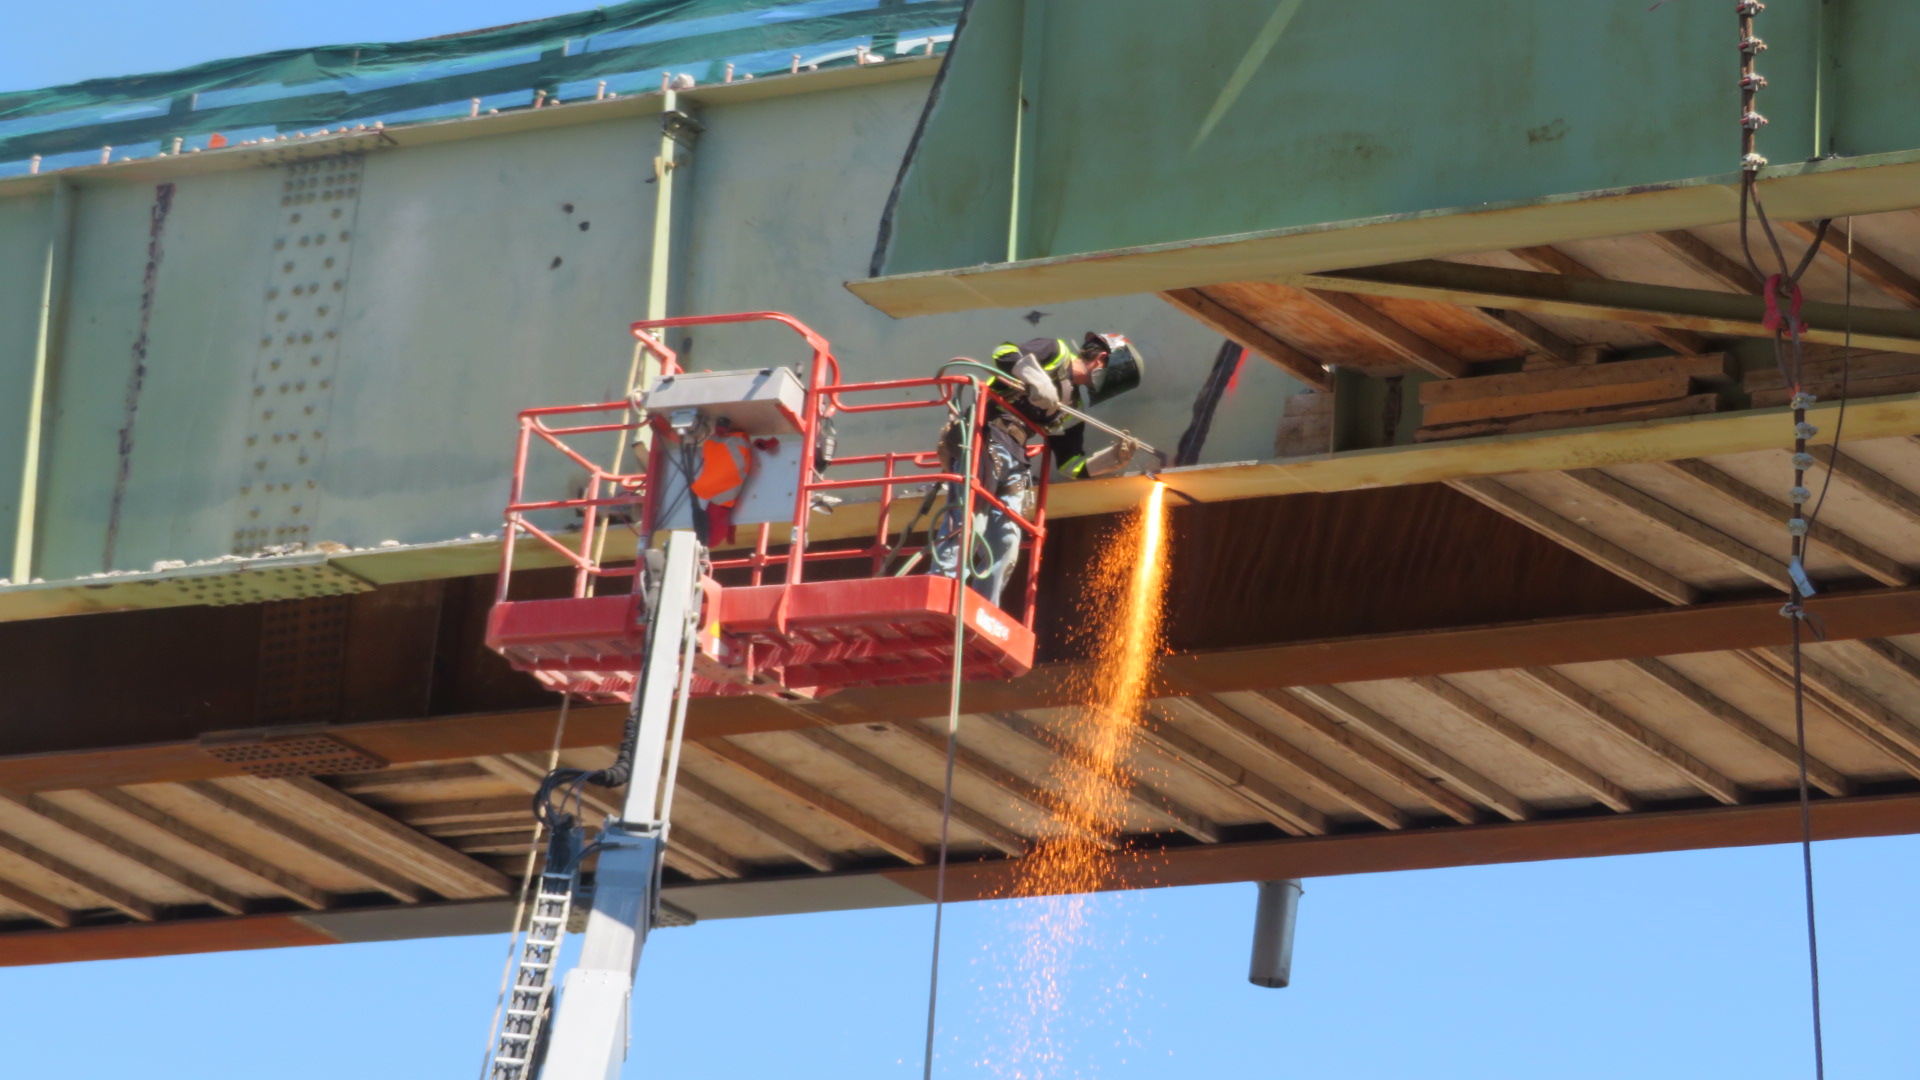 Torch cutting the bottom flange on the second girder section for removal